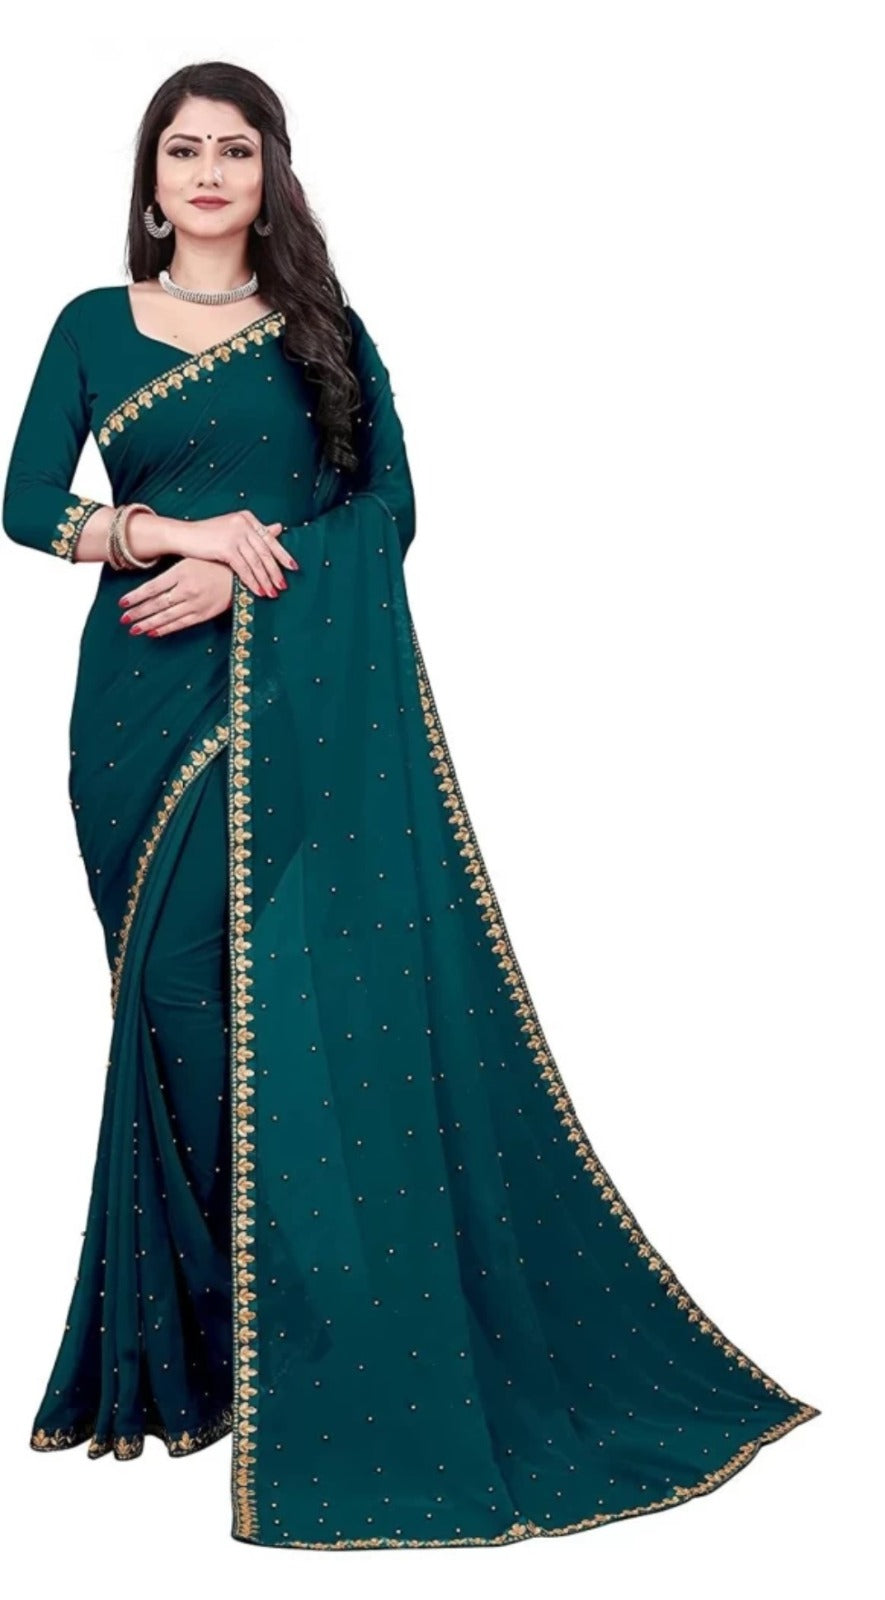 Women's Embroider Border with Placement Mirror Work Lycra Blend Saree With Blouse Piece (Petrol Blue) - NIMIDHYA